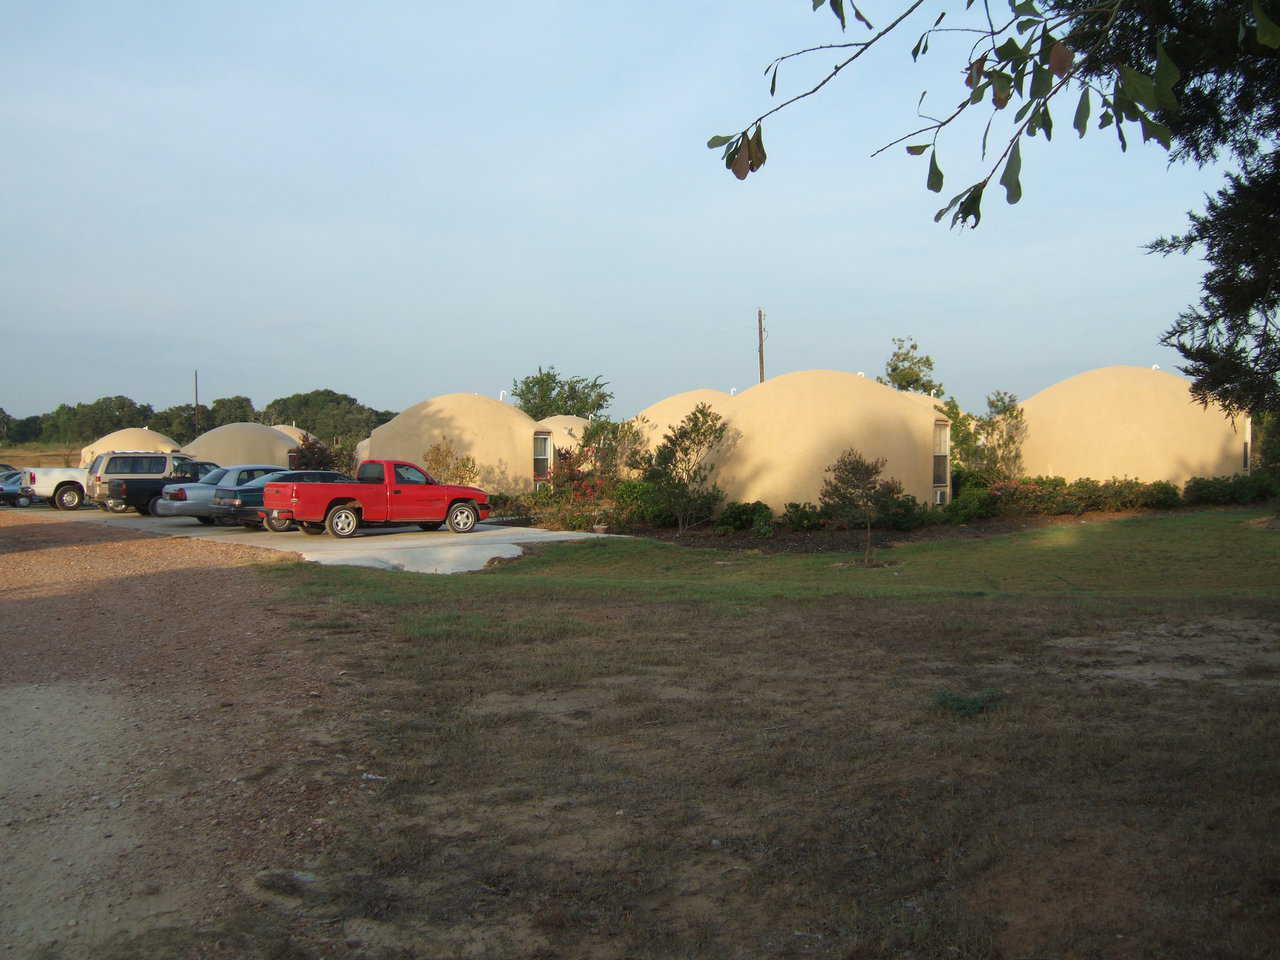 Fully Occupied — All sixteen of the completed domes are currently rented and there is a waiting list.